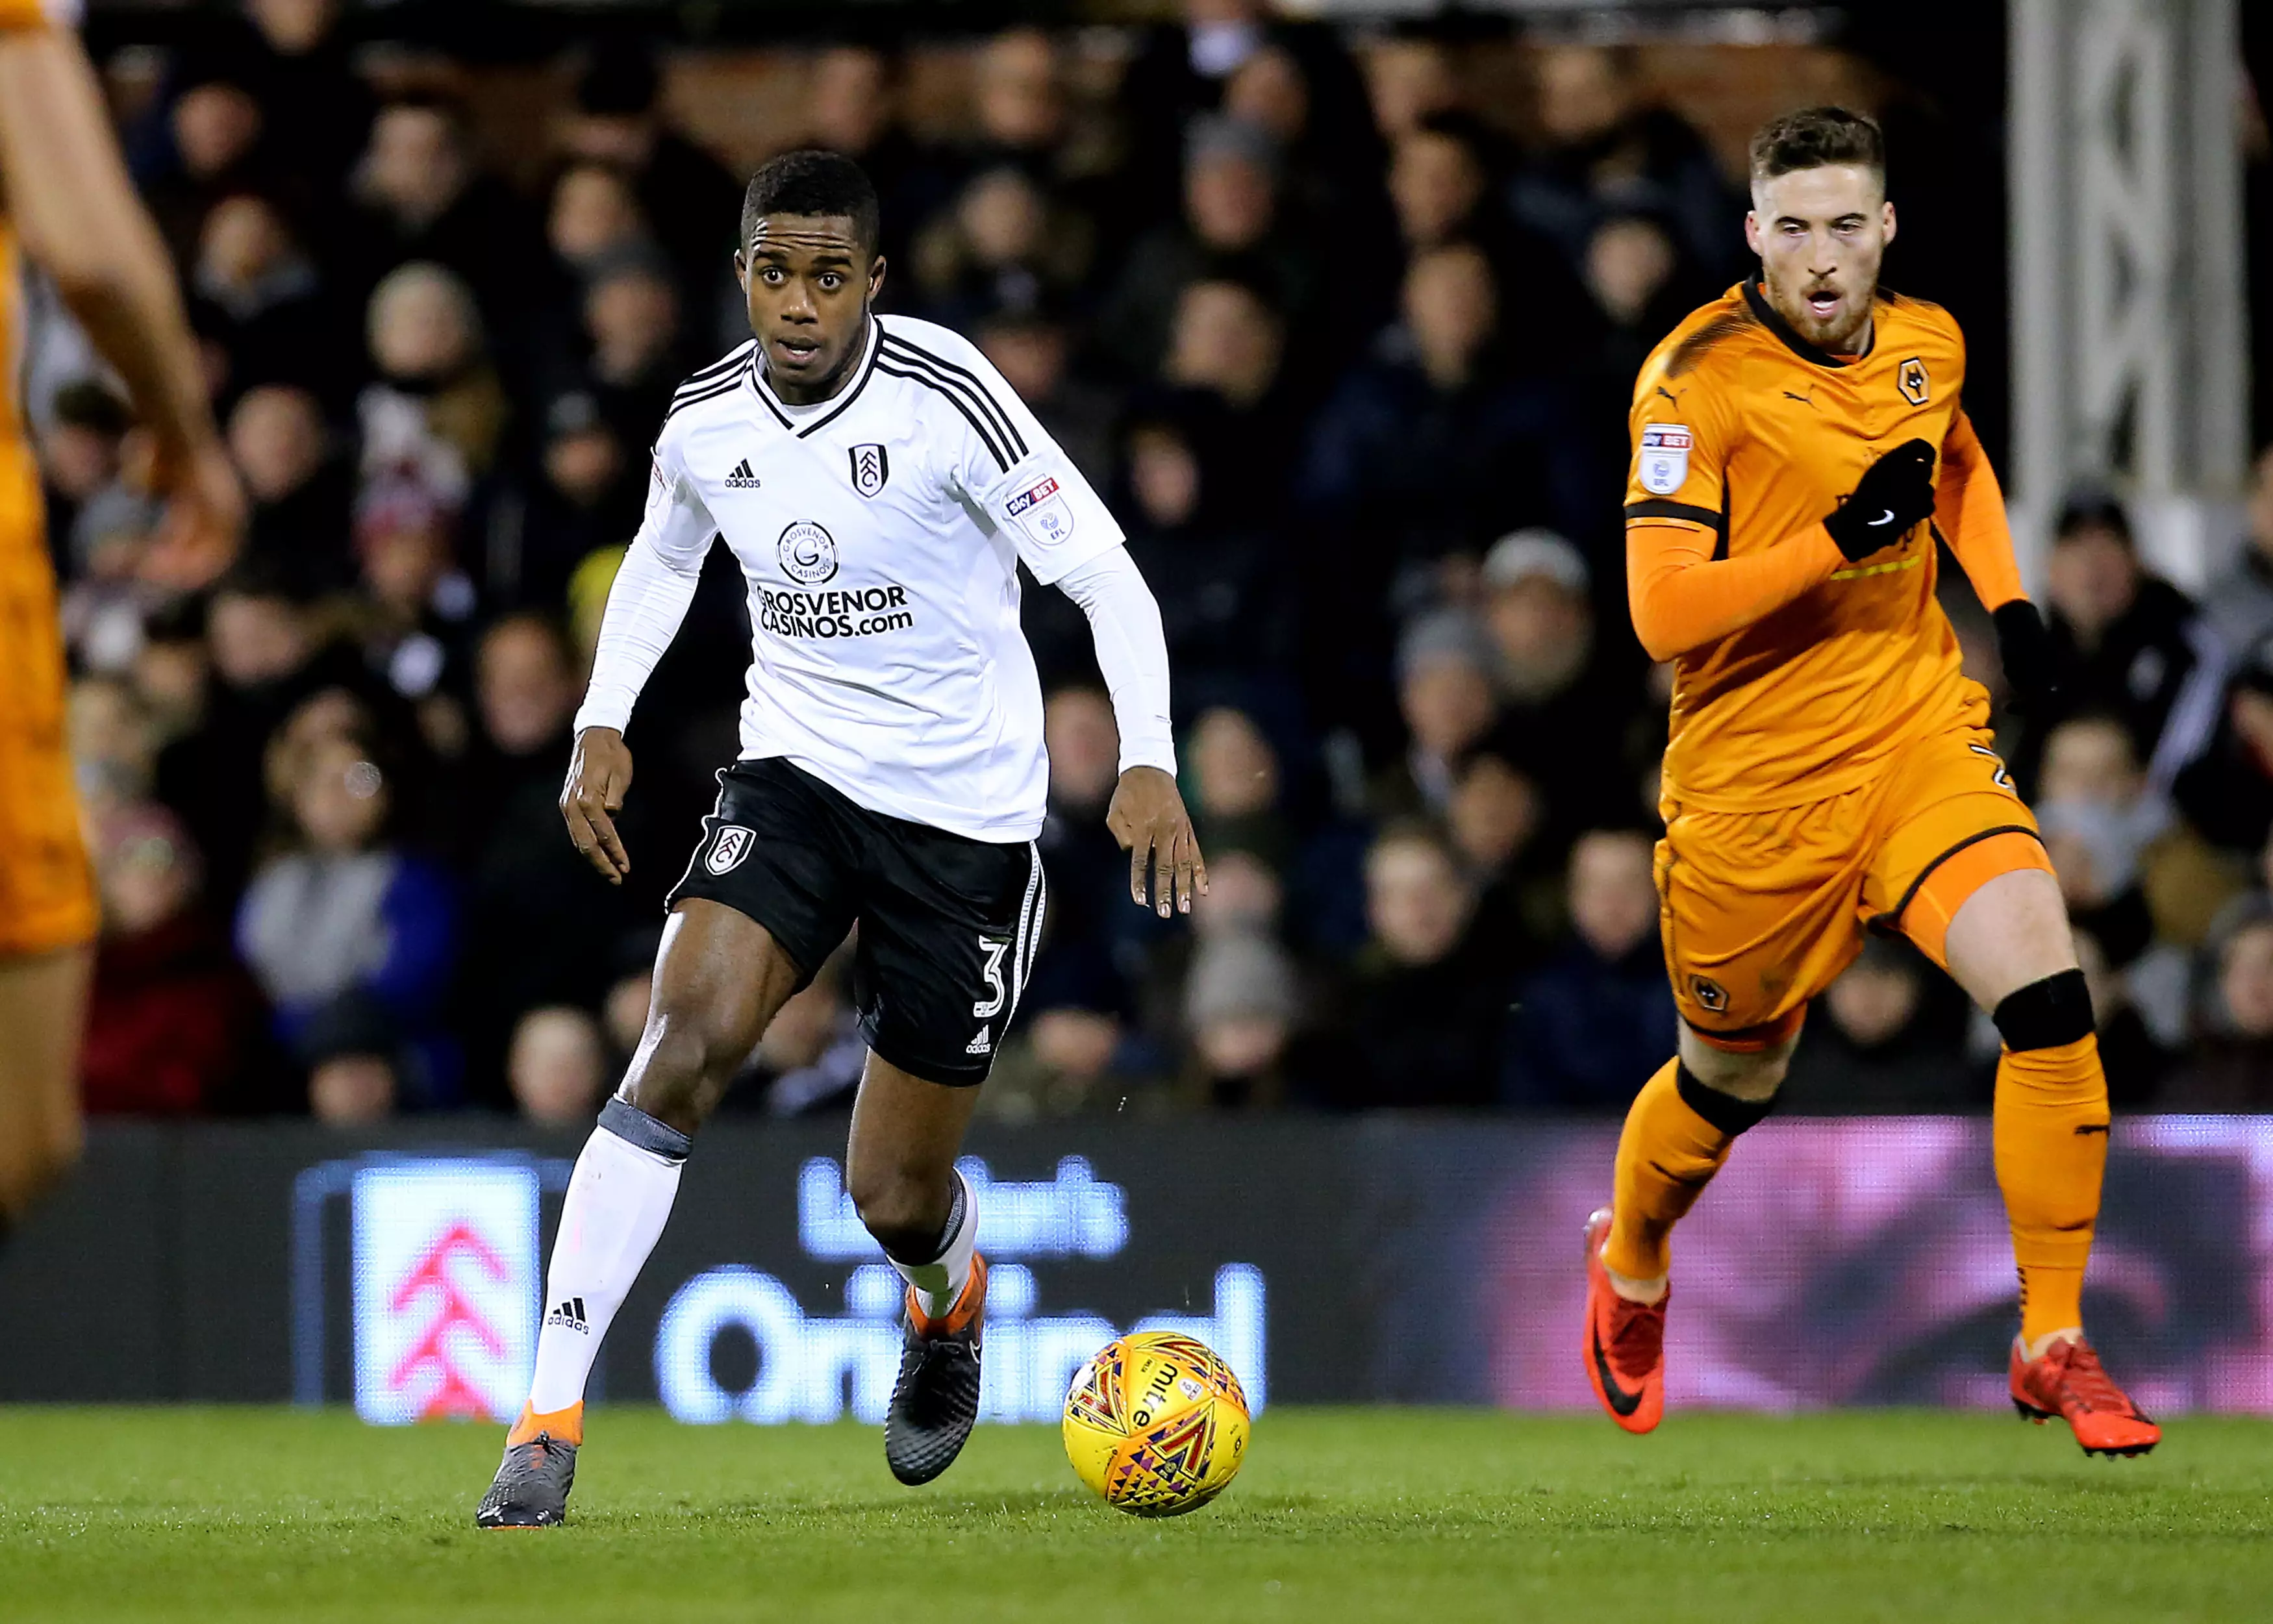 Sessegnon has been impressing at Craven Cottage this season. Image: PA Images.